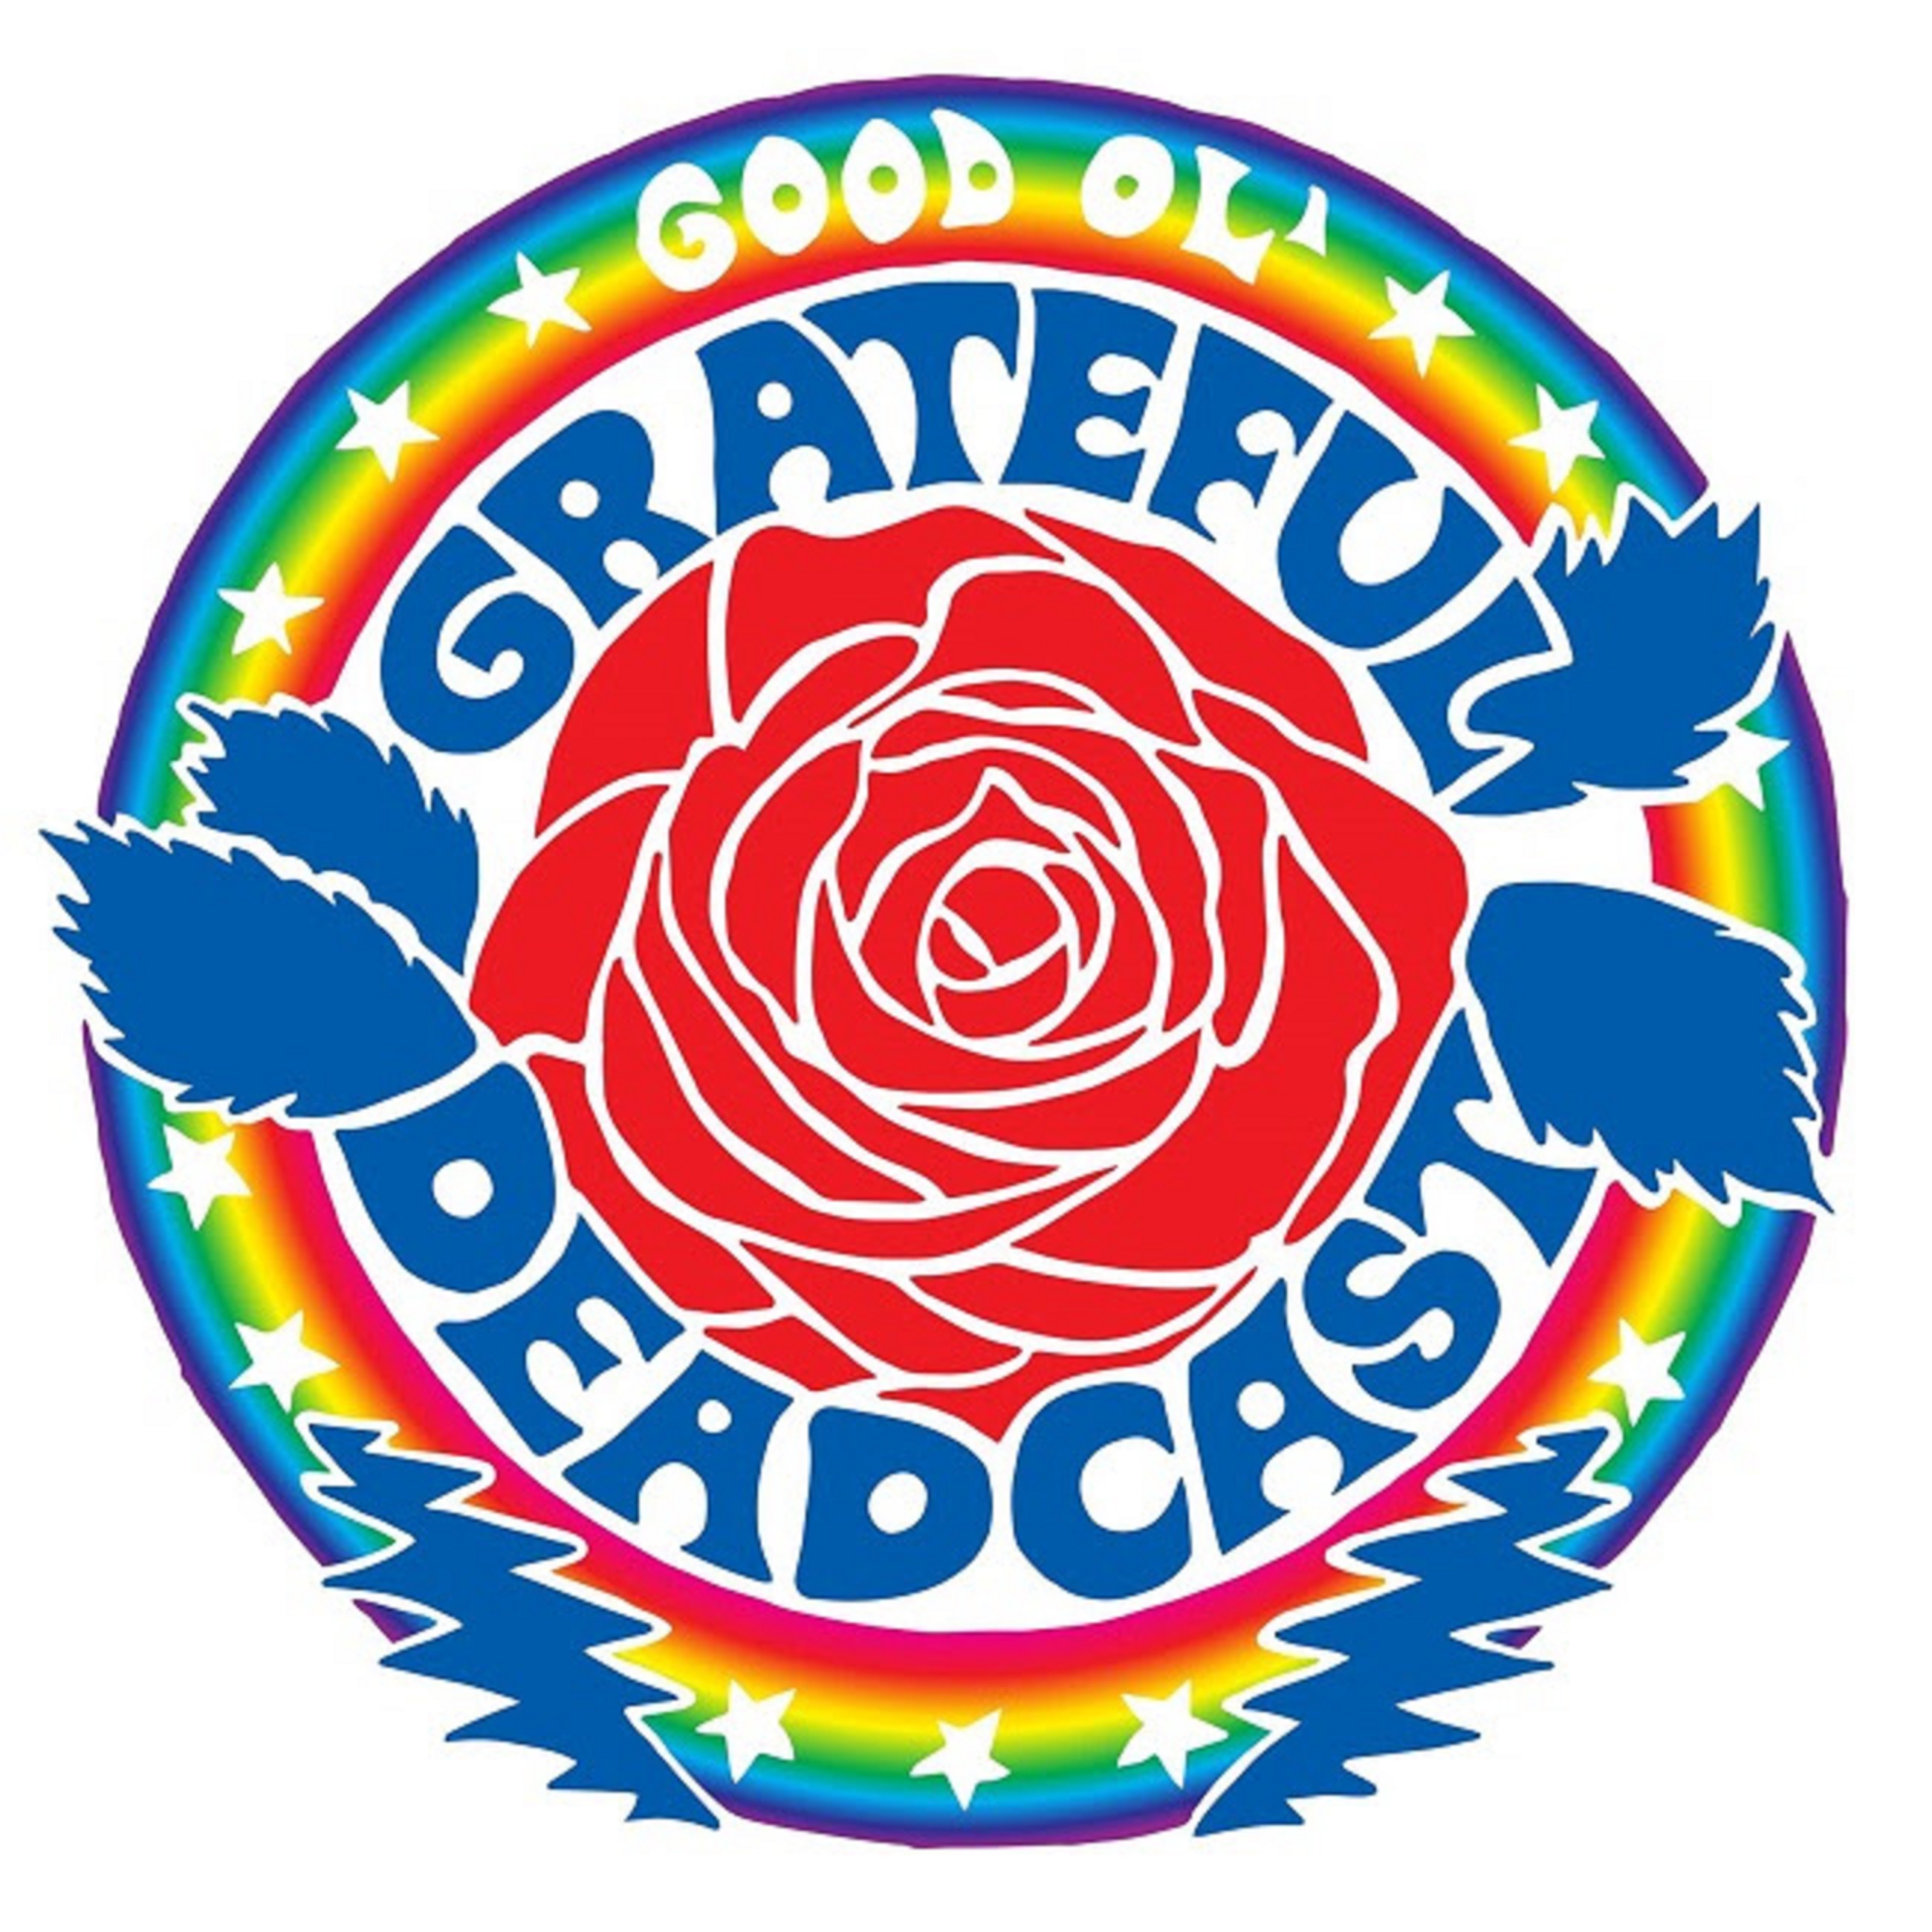 All About Grateful Dead in Lyceum 5/23-5/26